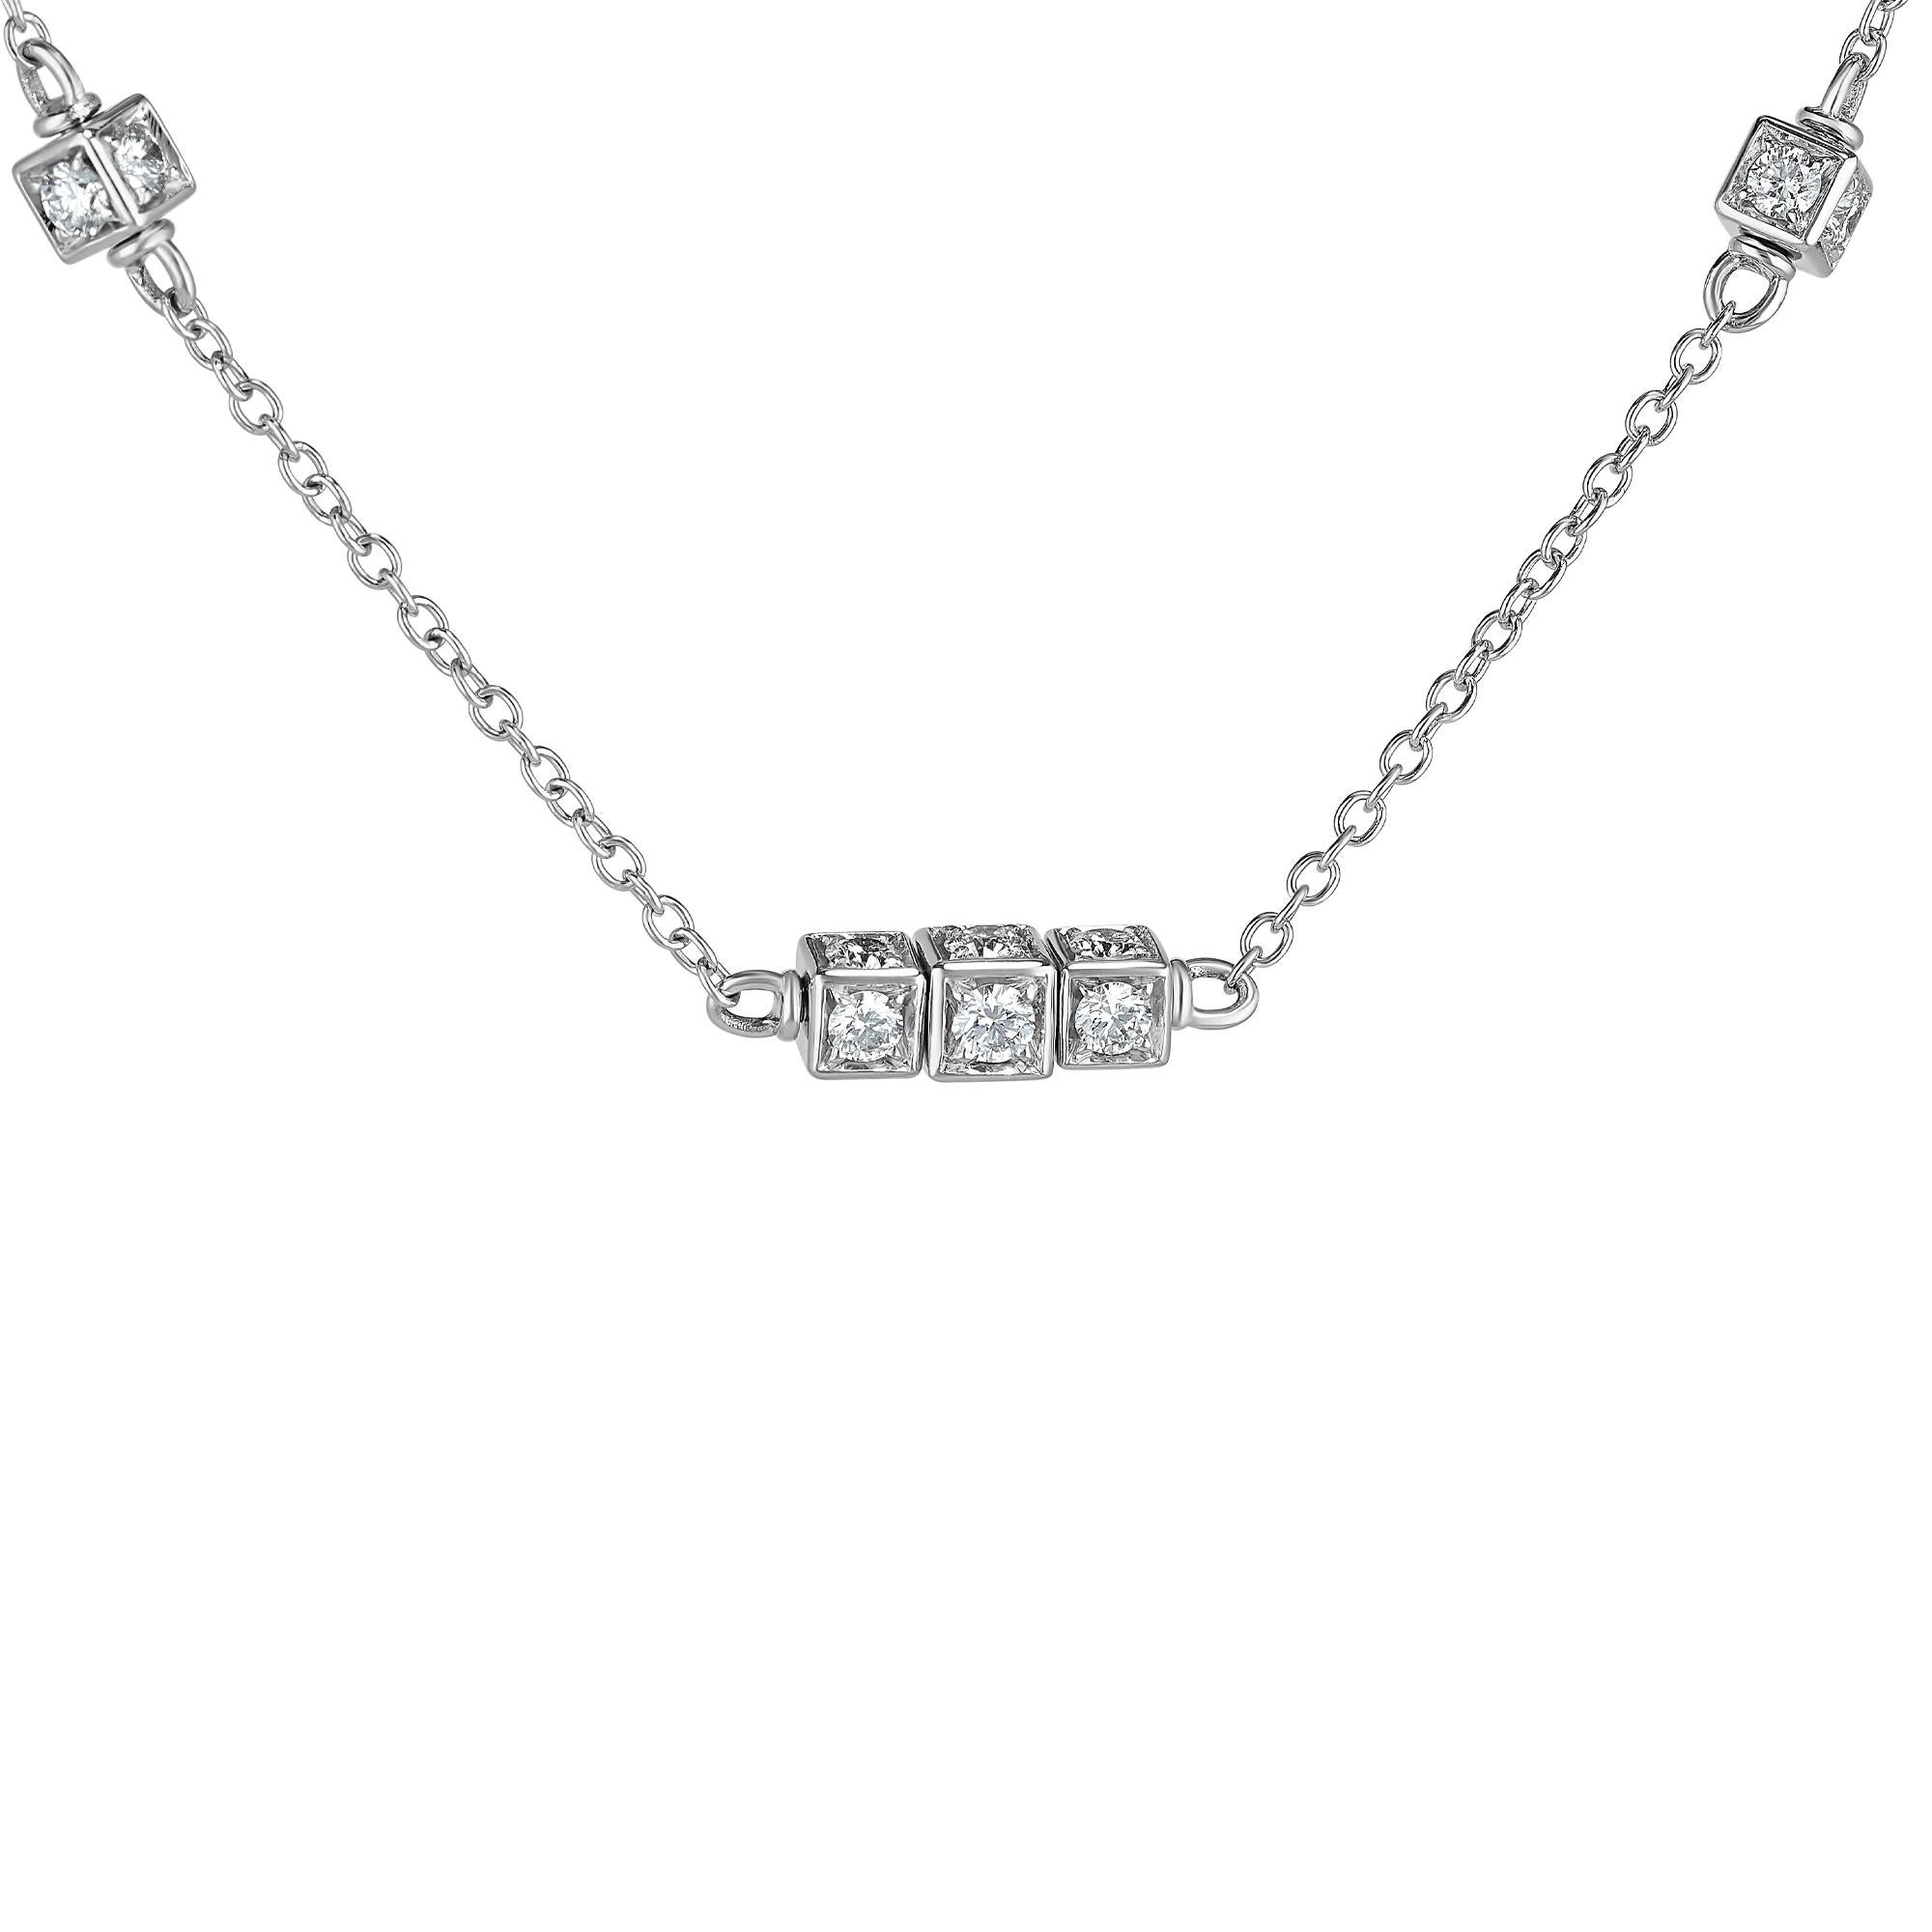 cube necklace with diamond inside